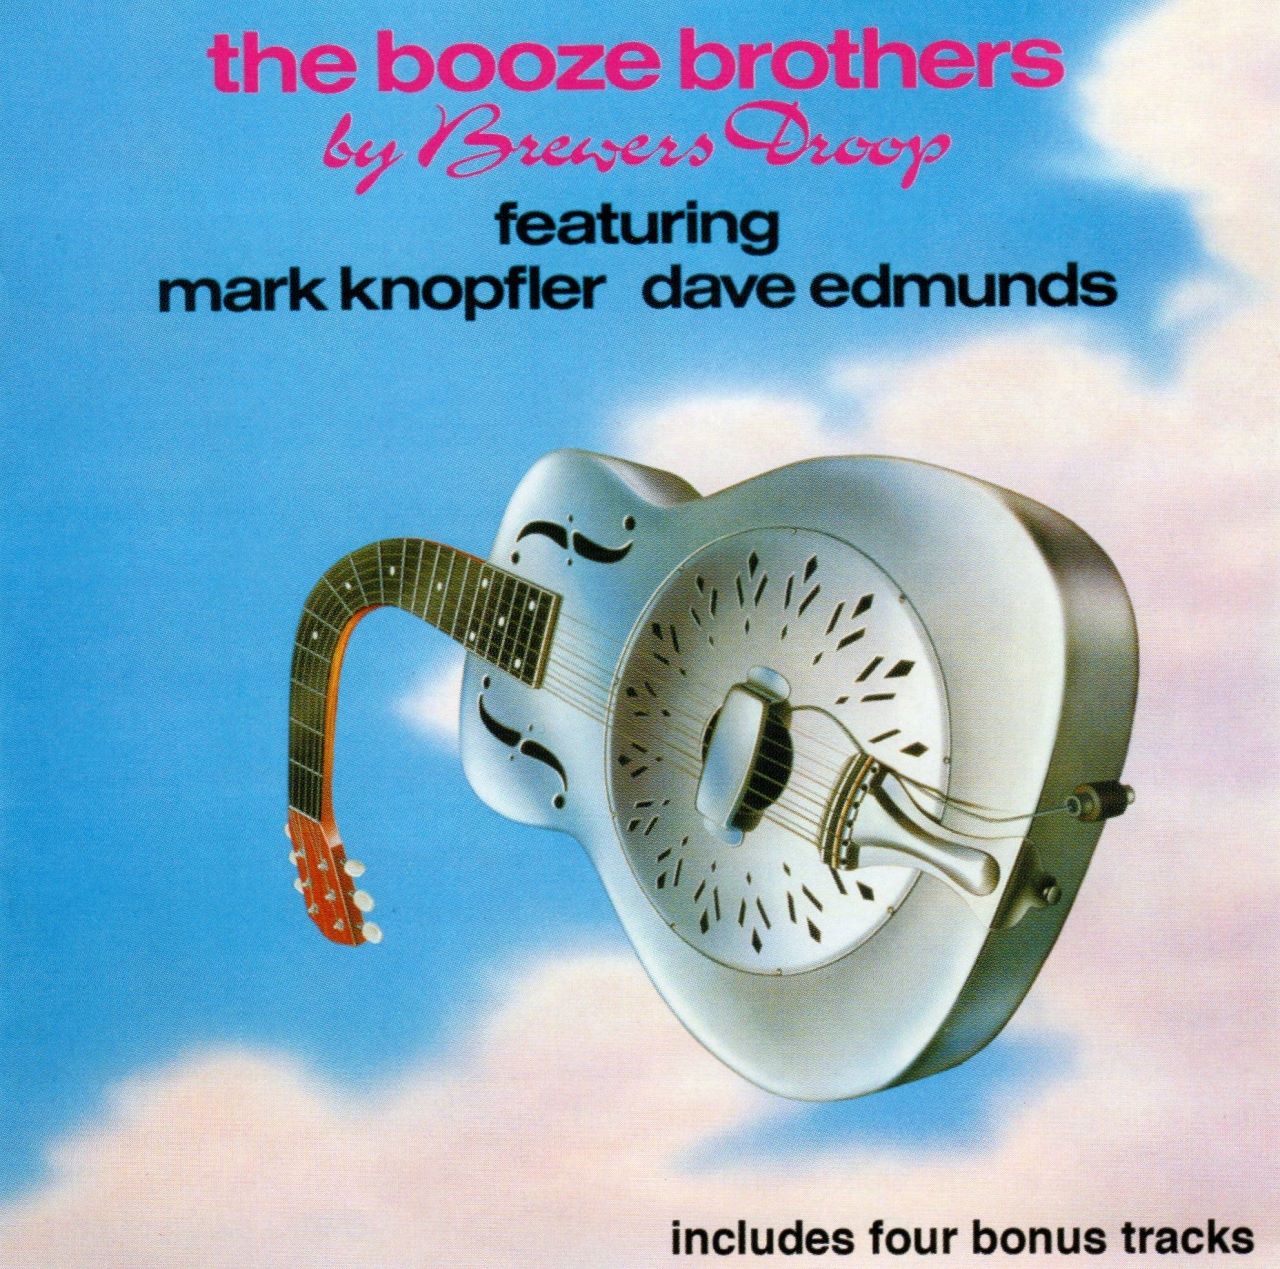 Brewers Droop - The Booze Brothers cover album